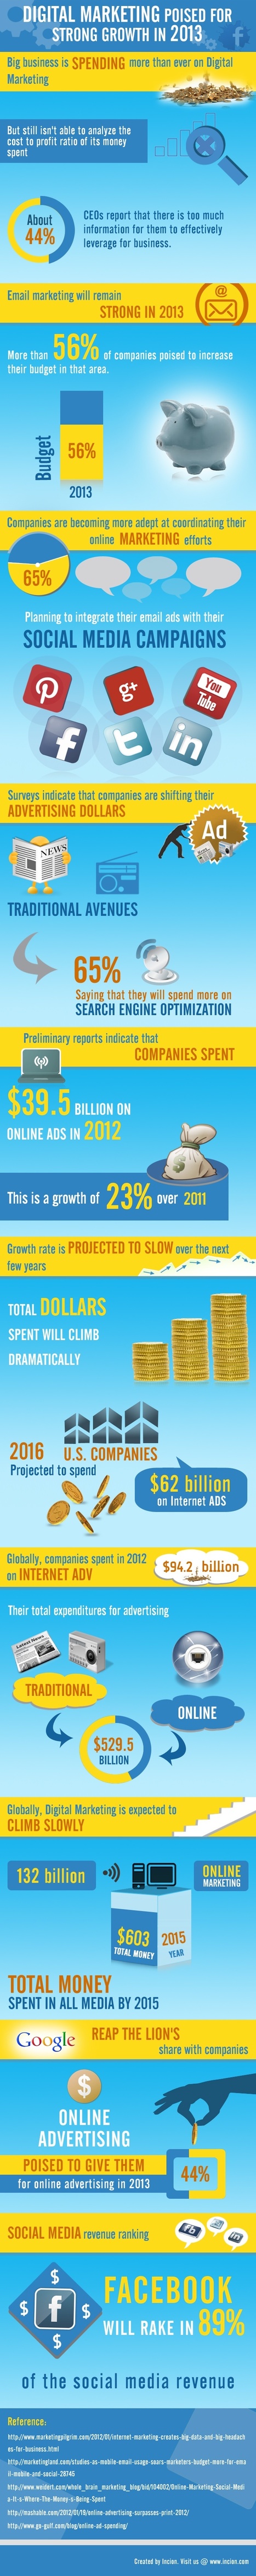 Growth of digital marketing in 2013 [Infographic] | MarketingHits | Scoop.it